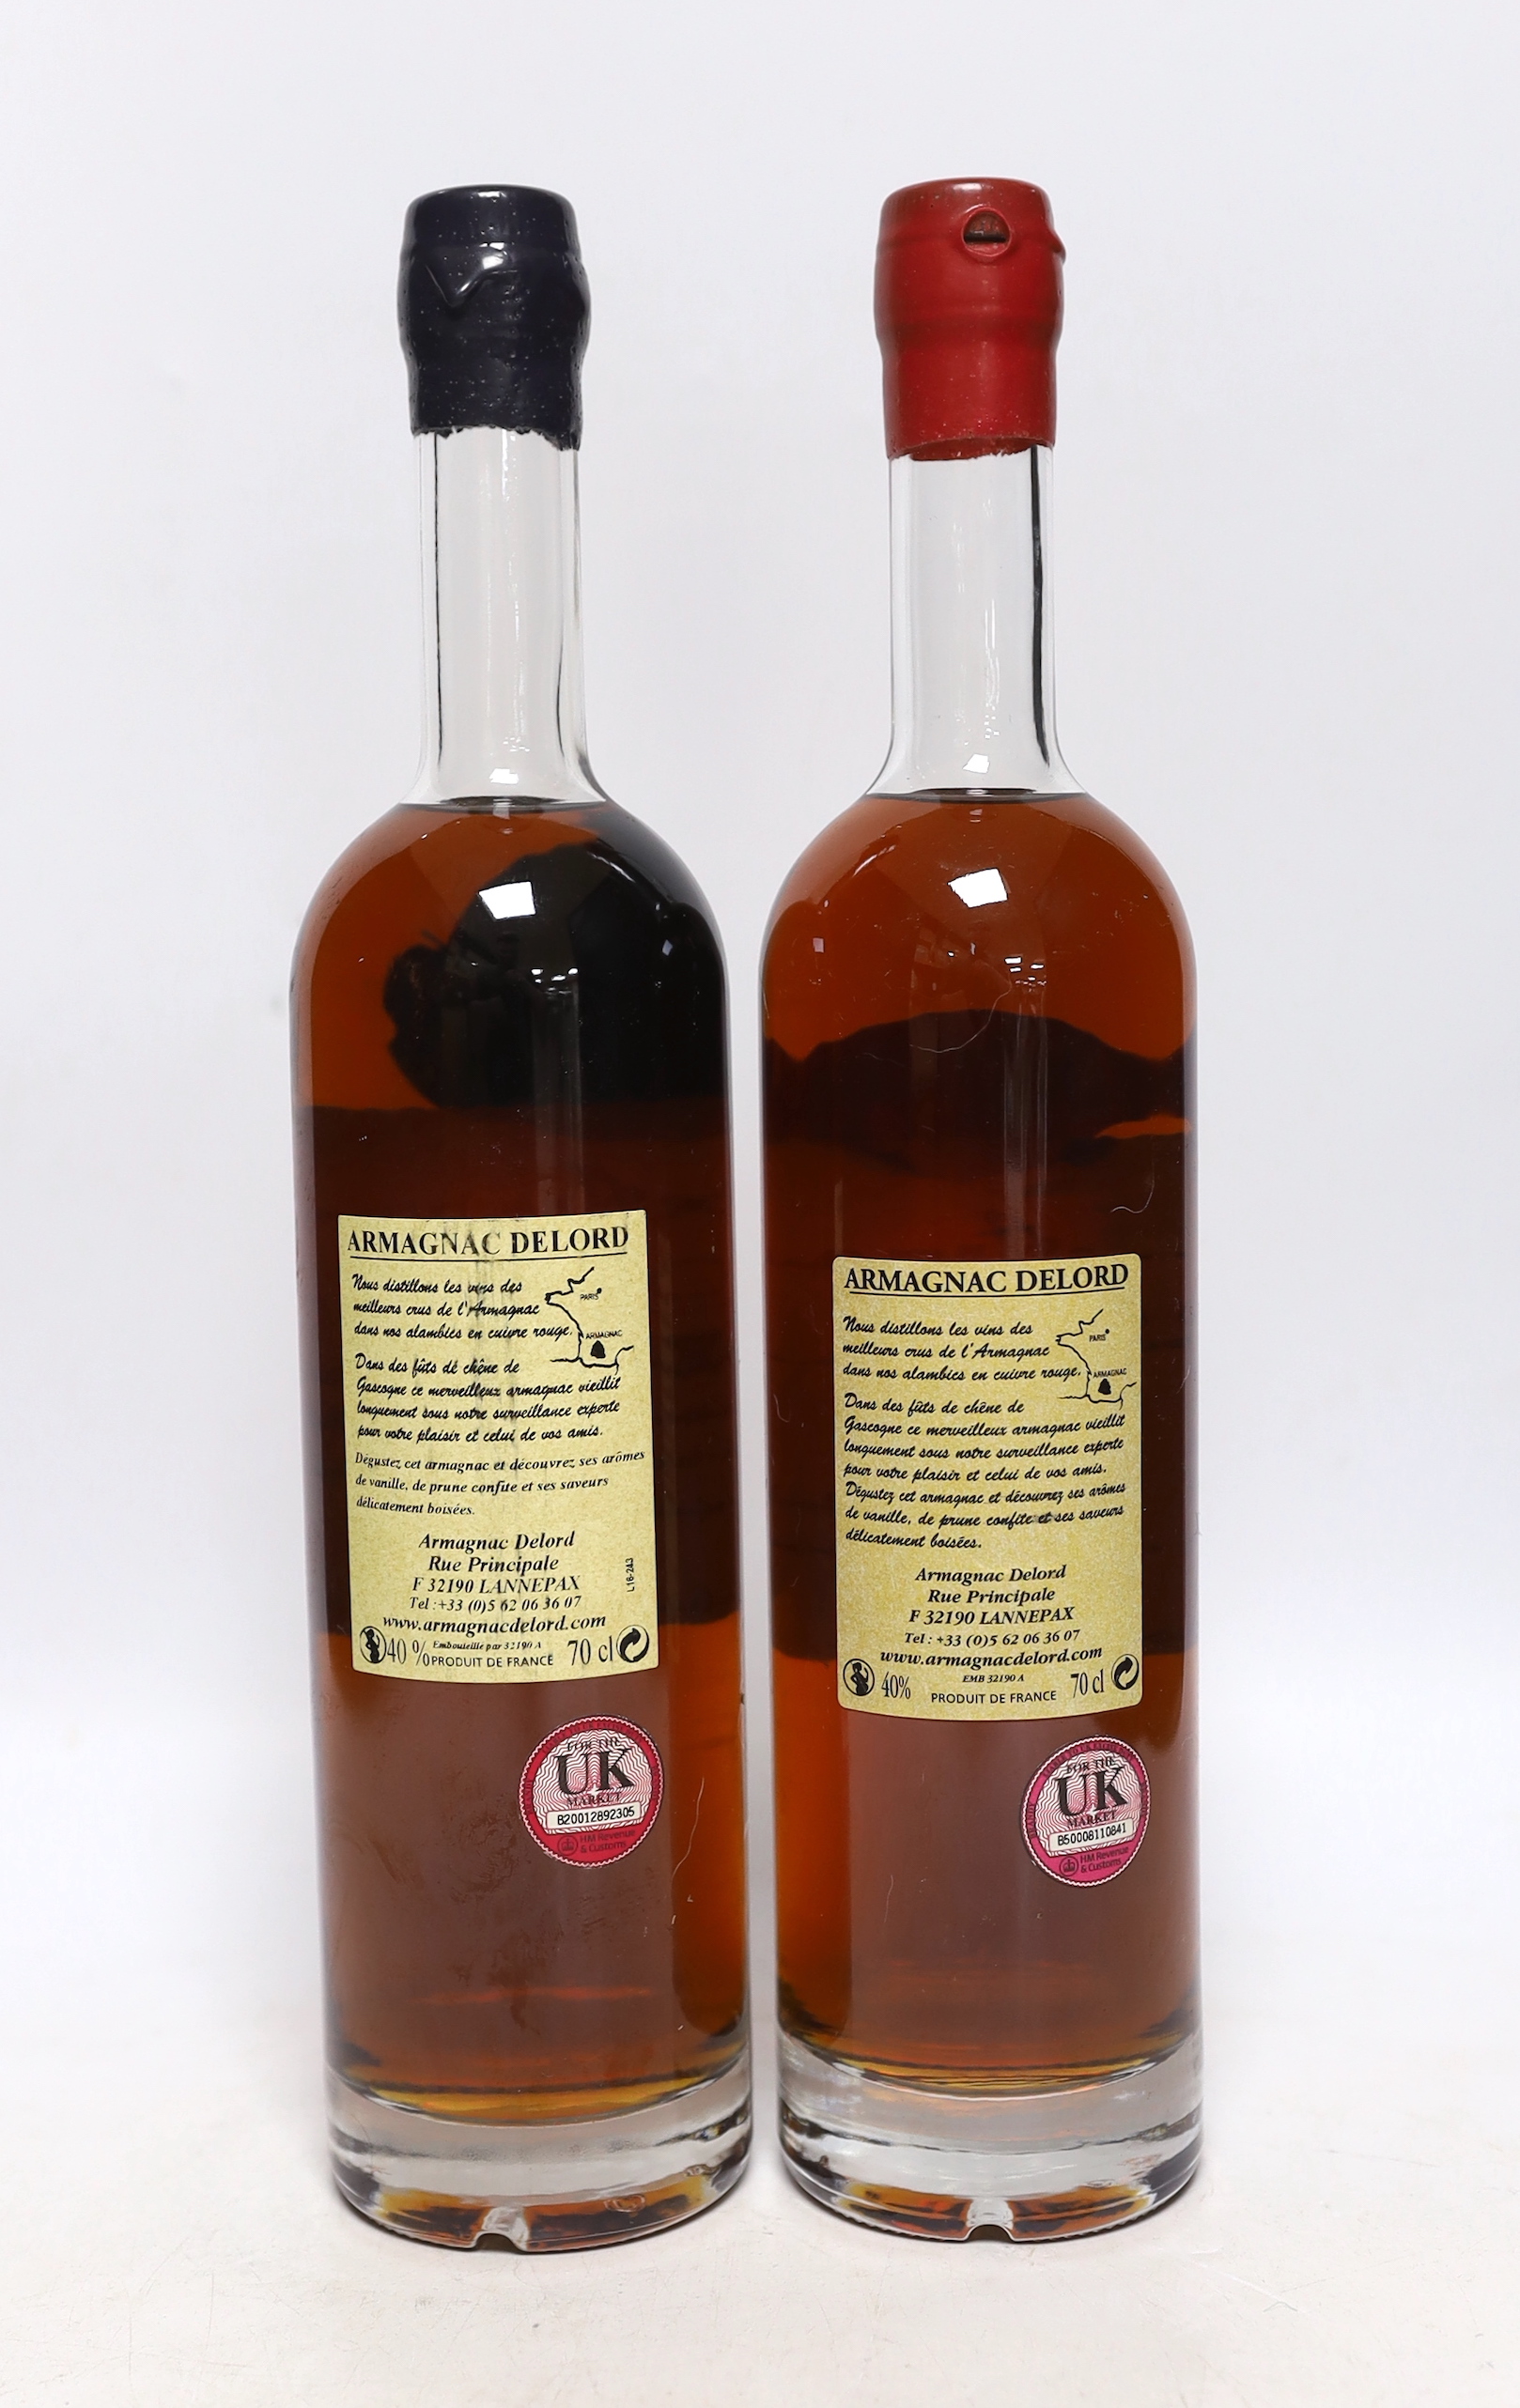 Two bottles of Bas-Armagnac Delord, one VSOP, one 15 year old